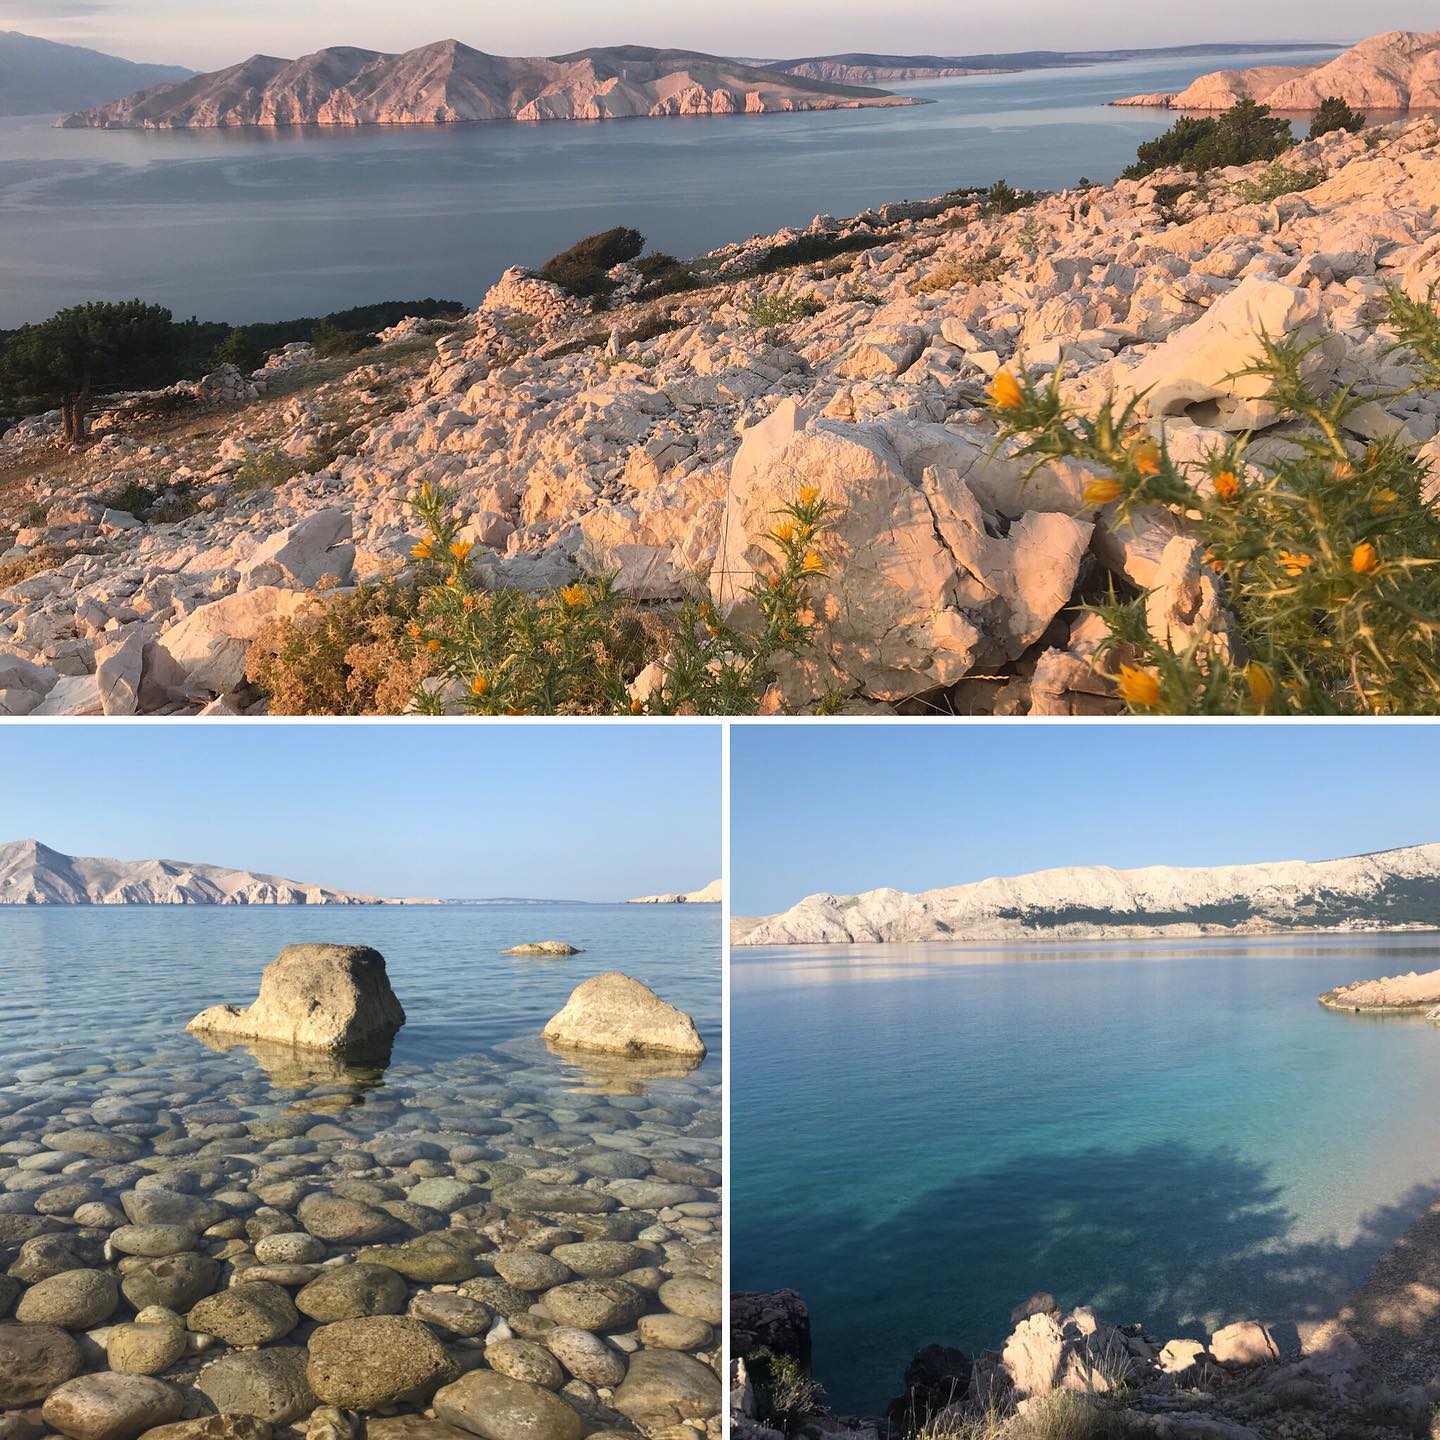 Is it really possible to have sunrise hike and swimming in beautiful Adriatic Sea in Croatia just 100km from Slovenian Alps? Many Perfect #hiddengem in Croatia 🇭🇷 for Vandrovc-Globetrotter travelers adventures. 👉www.vg-guides.com for tips or join our scheduled hiking tours.Small groups with other enthusiasts - perfect for solo travelers. 👉Tag someone who would love it.